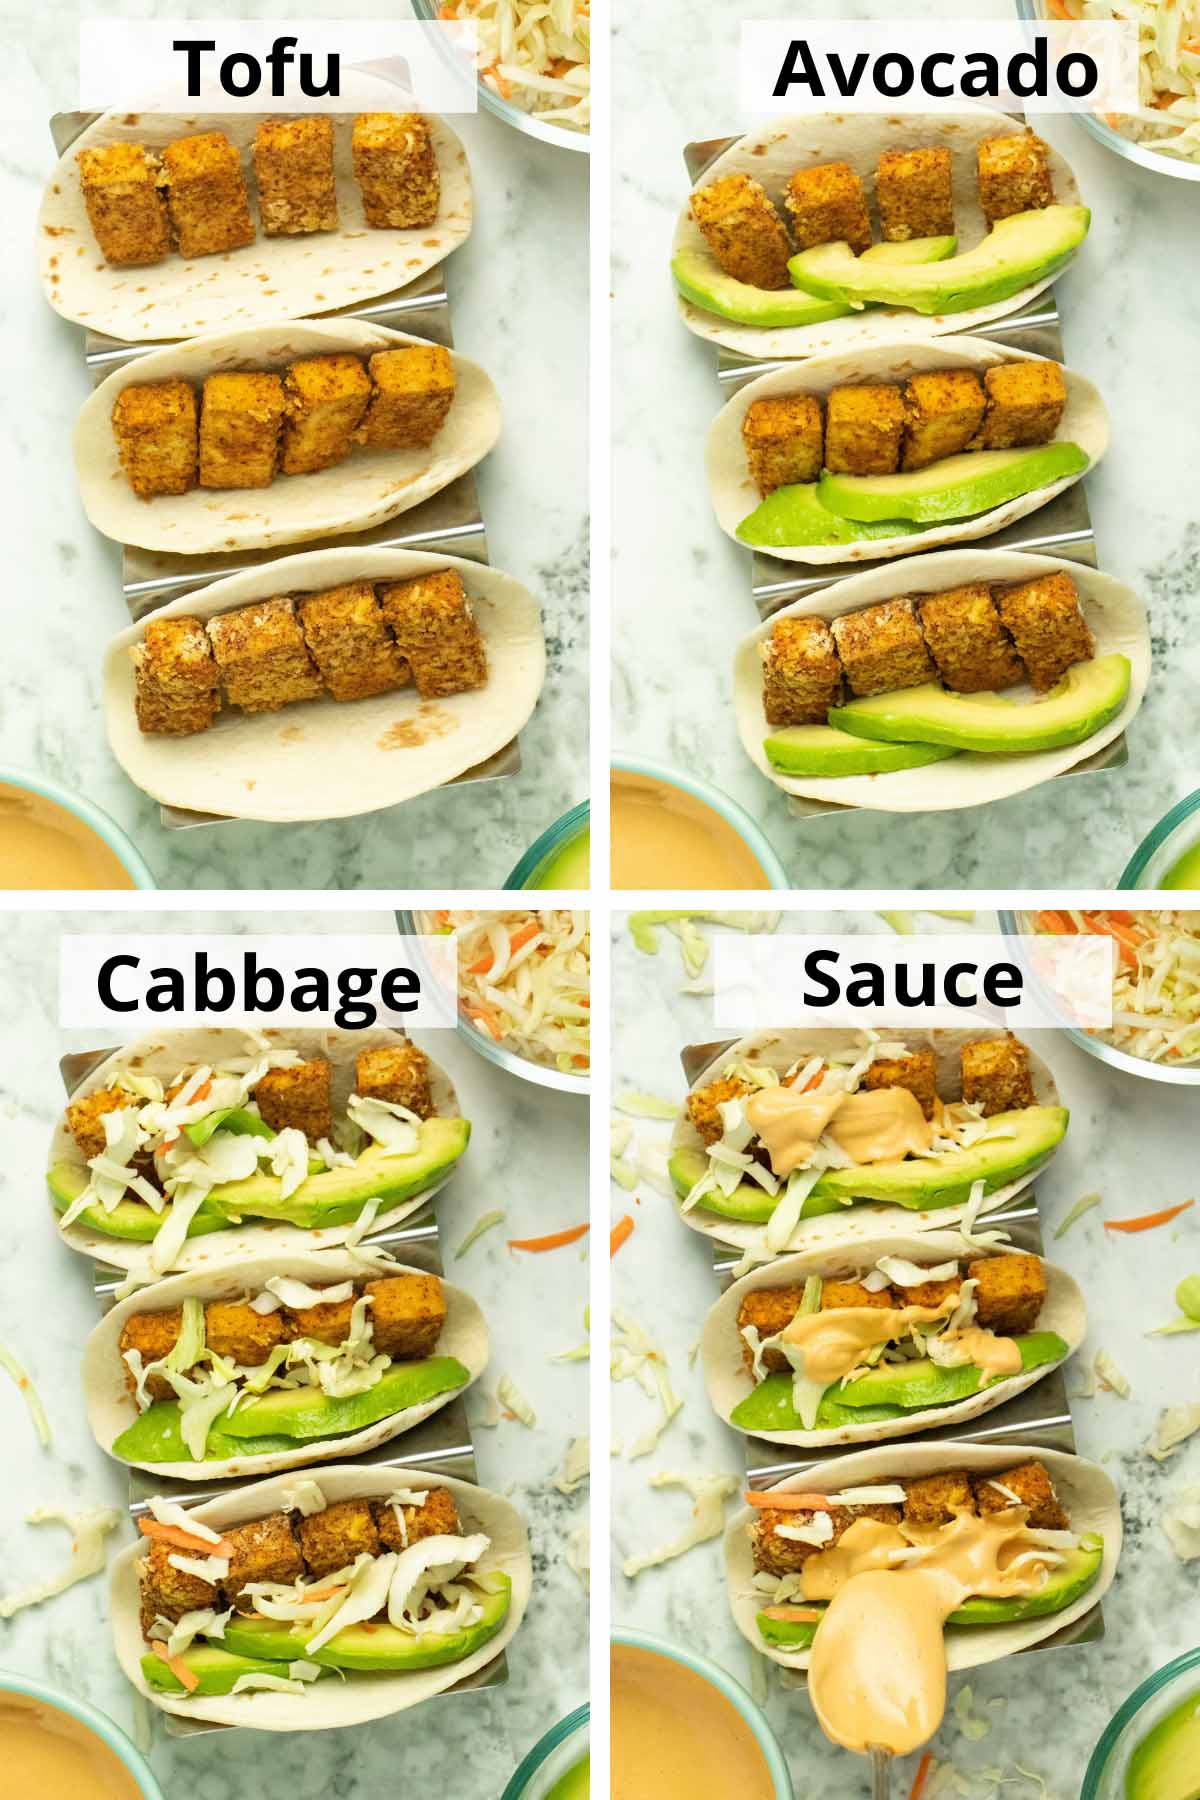 image collage showing the tofu in the tortillas, adding the avocado, adding the cabbage, and adding the sauce